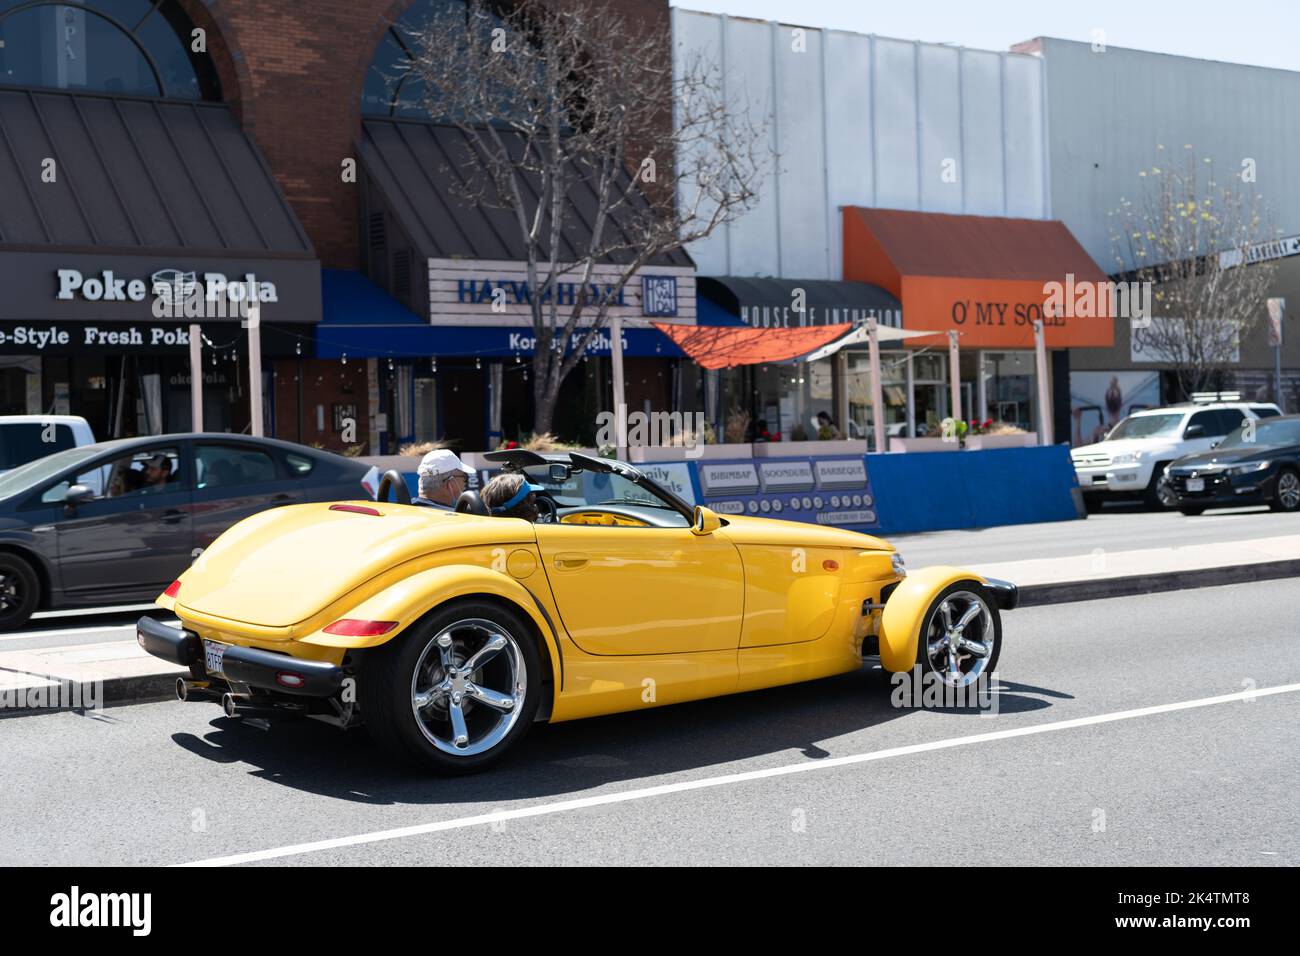 Long Beach, California USA - March 31, 2021: classic automobile of yellow Chrysler Plymouth Prowler Stock Photo